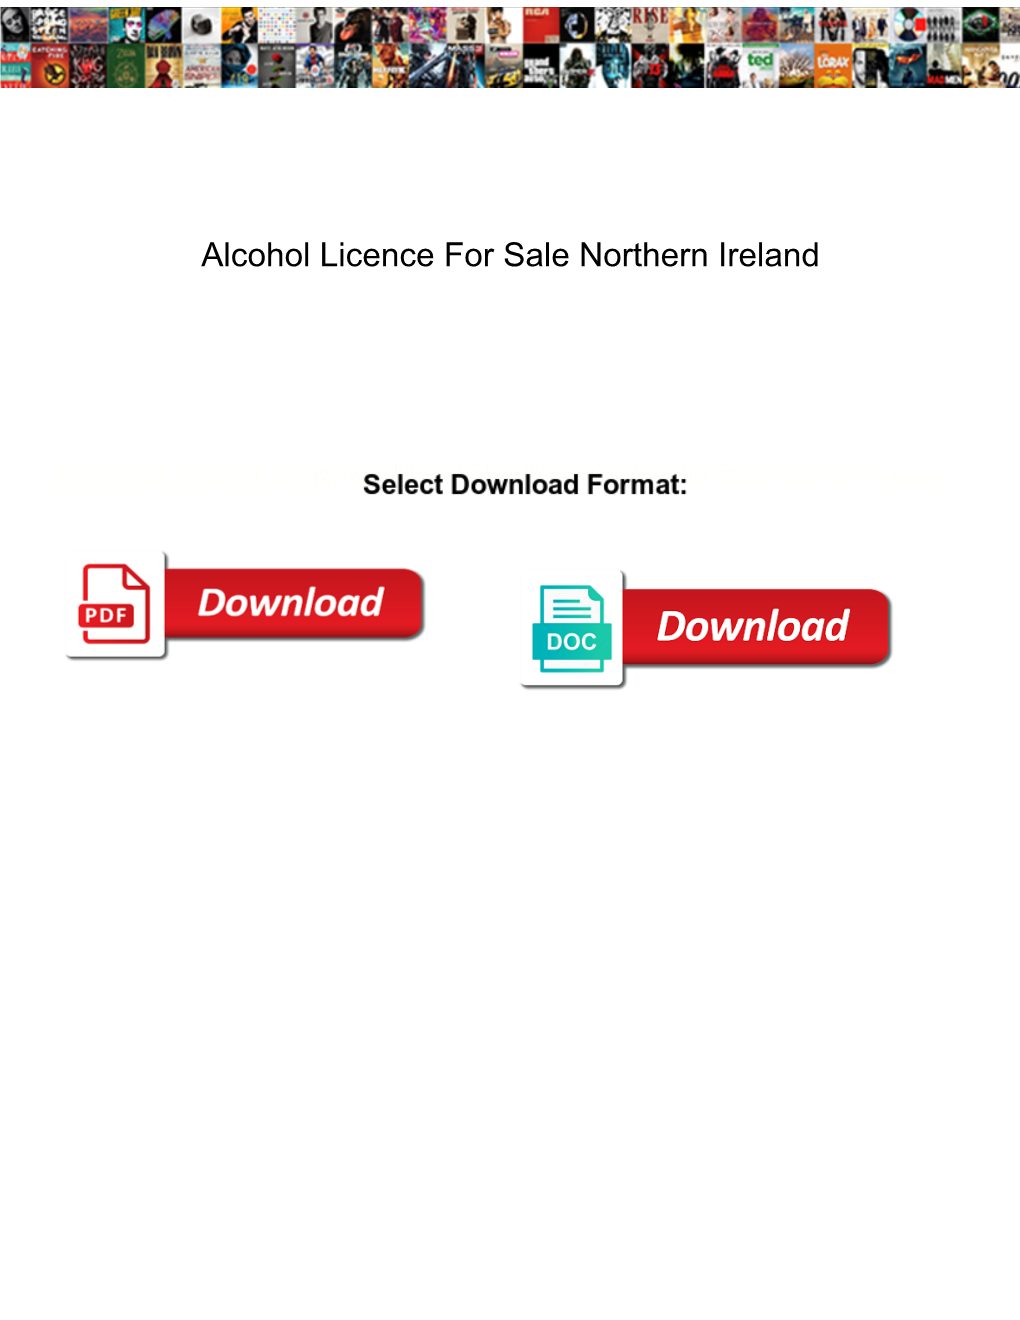 Alcohol Licence for Sale Northern Ireland